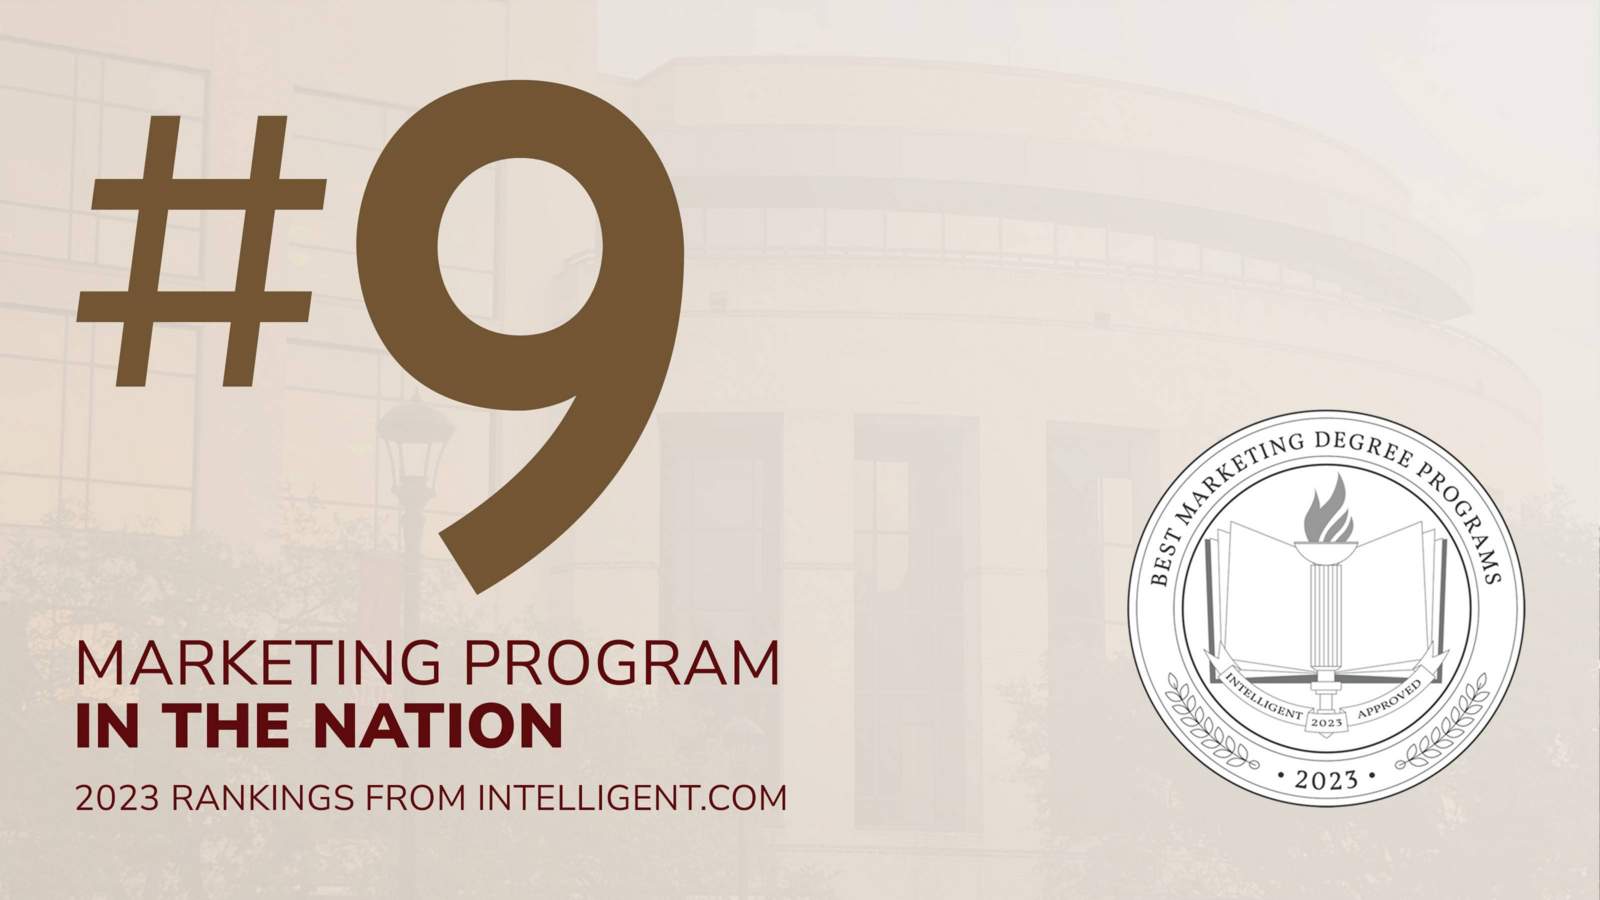 Sandstone graphic featuring McCoy College of Business logo with gold and maroon text that reads: "Number nine marketing program in the nation. 2023 rankings from Intelligent dot com."